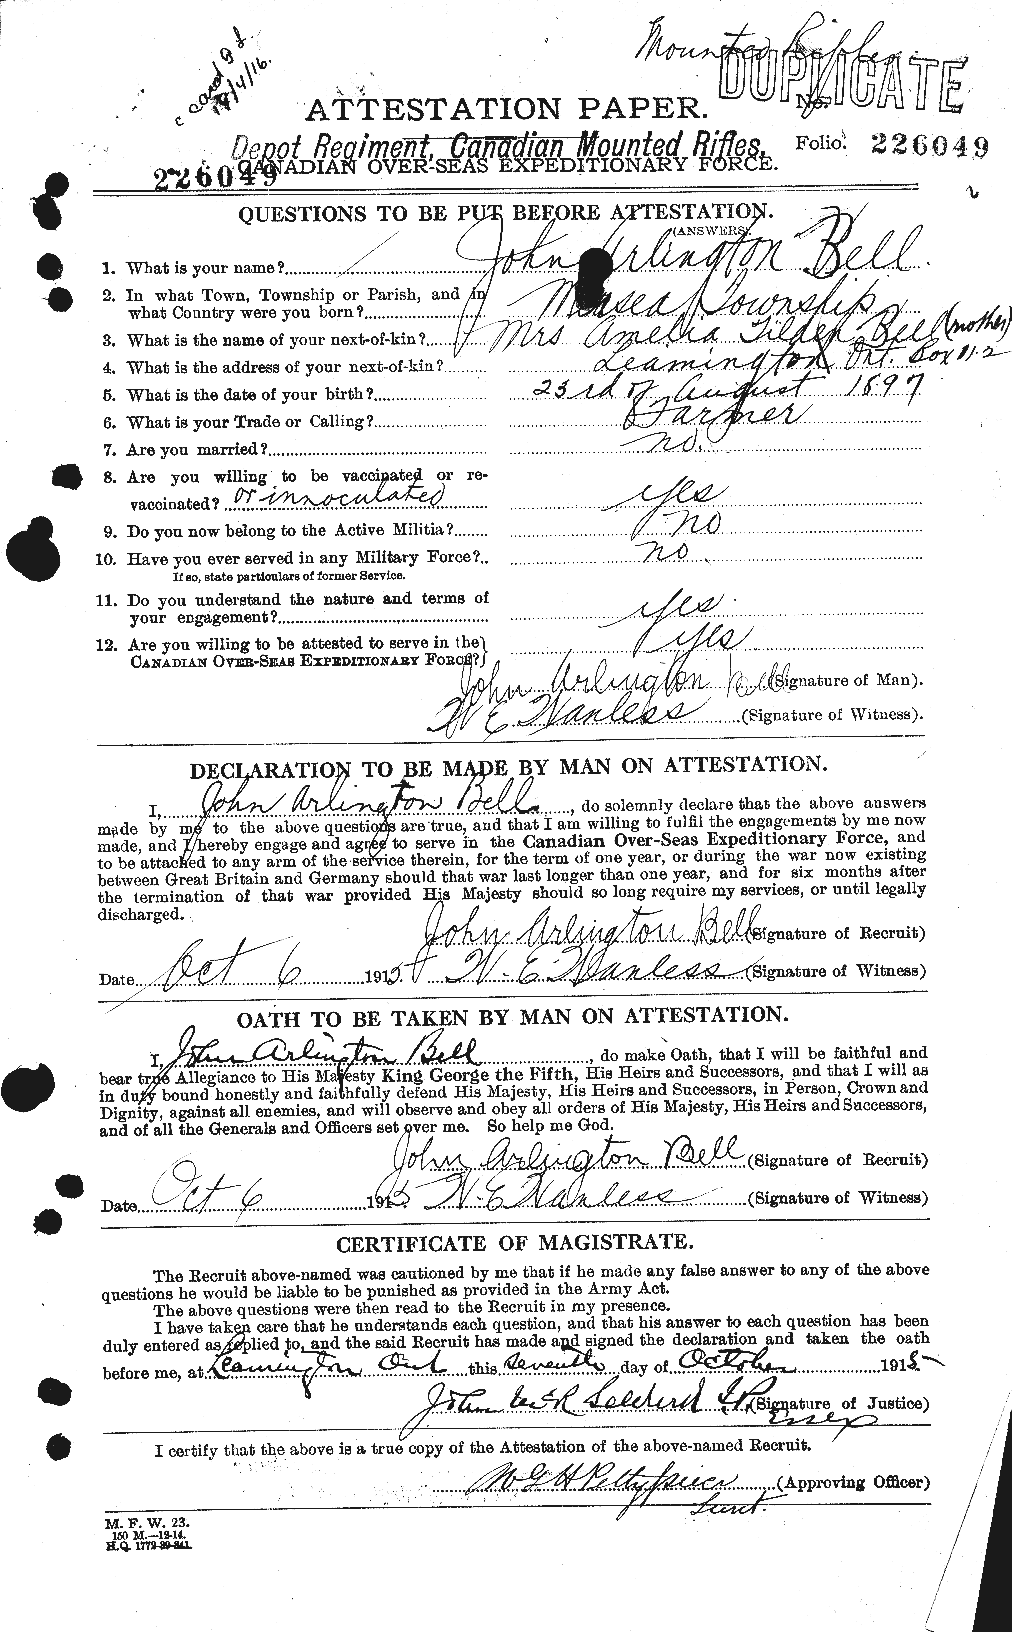 Personnel Records of the First World War - CEF 234390a